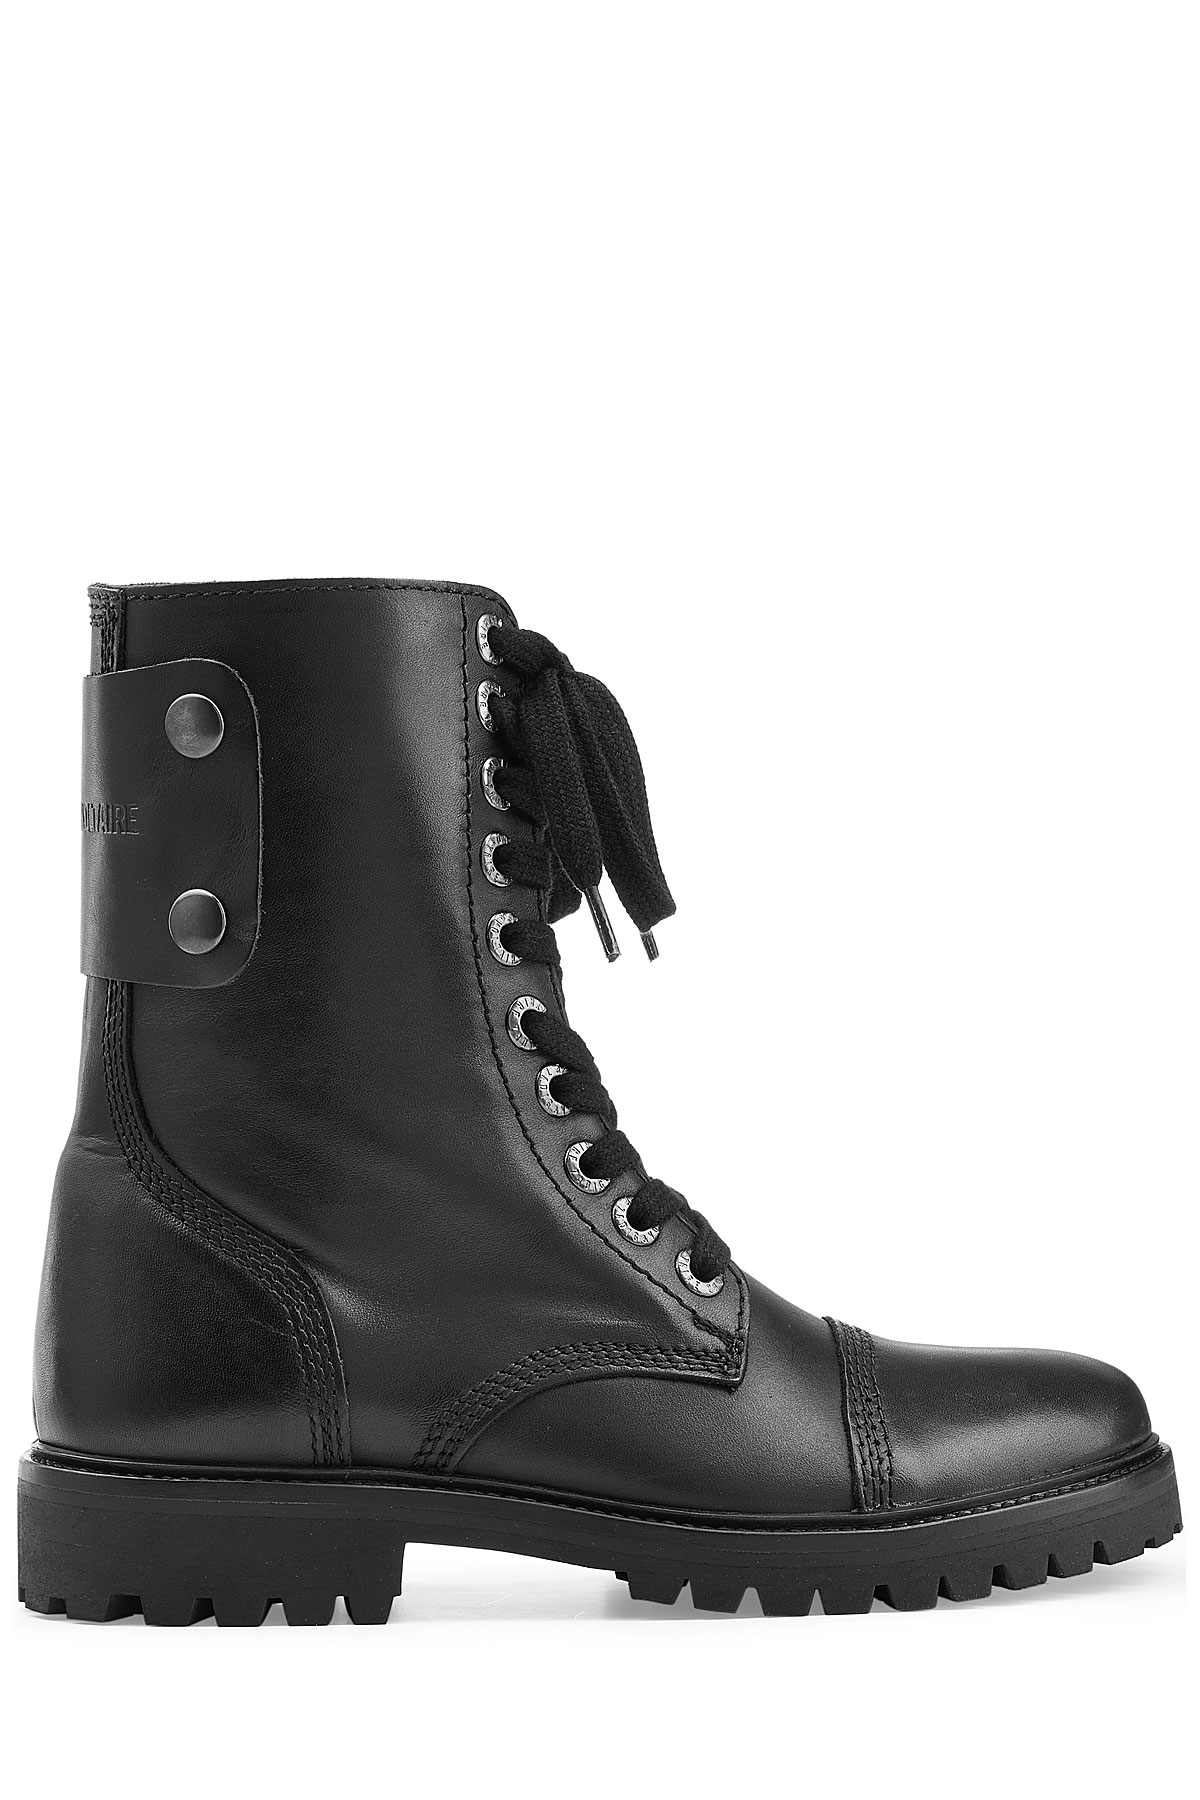 Lyst - Zadig & Voltaire Leather Boots - Black in Black